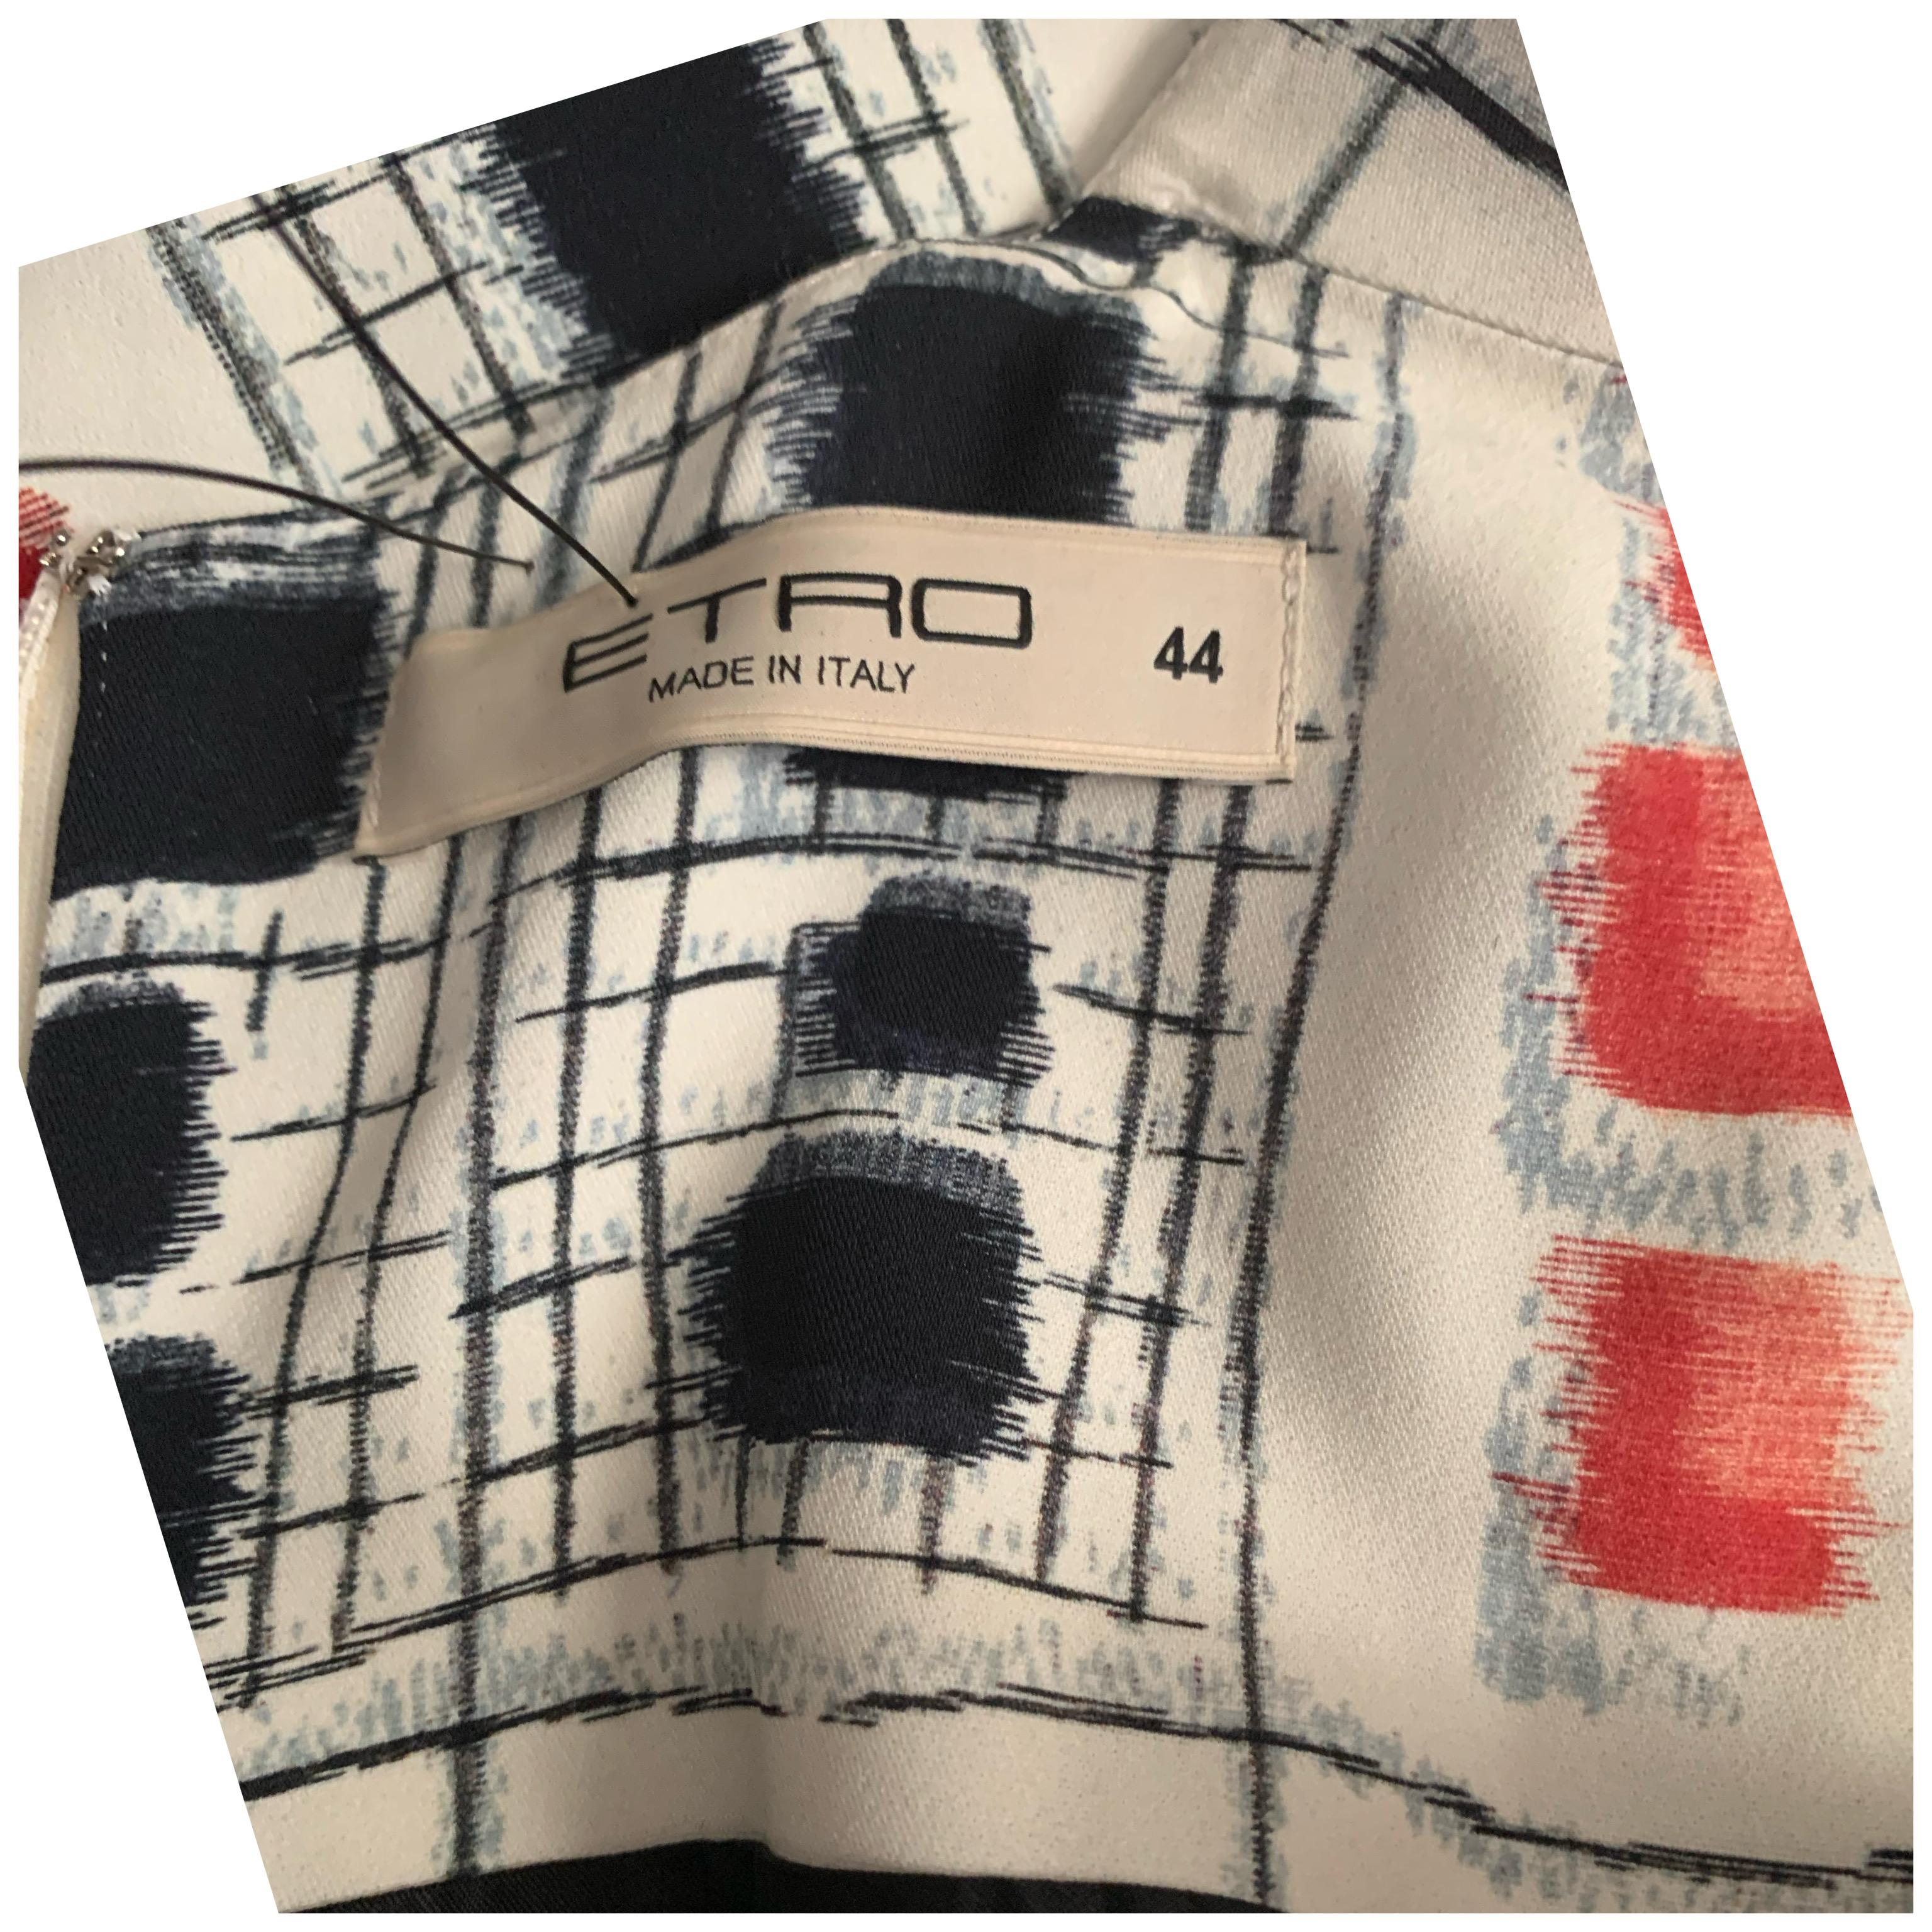 A very modern abstract print dress by Milan fashion house, Etro. This very chic dress has a interesting solid black inset that is shaped to the body down the front of the dress. longer silhoette passed the new looks very fresh. Italian size: 44.